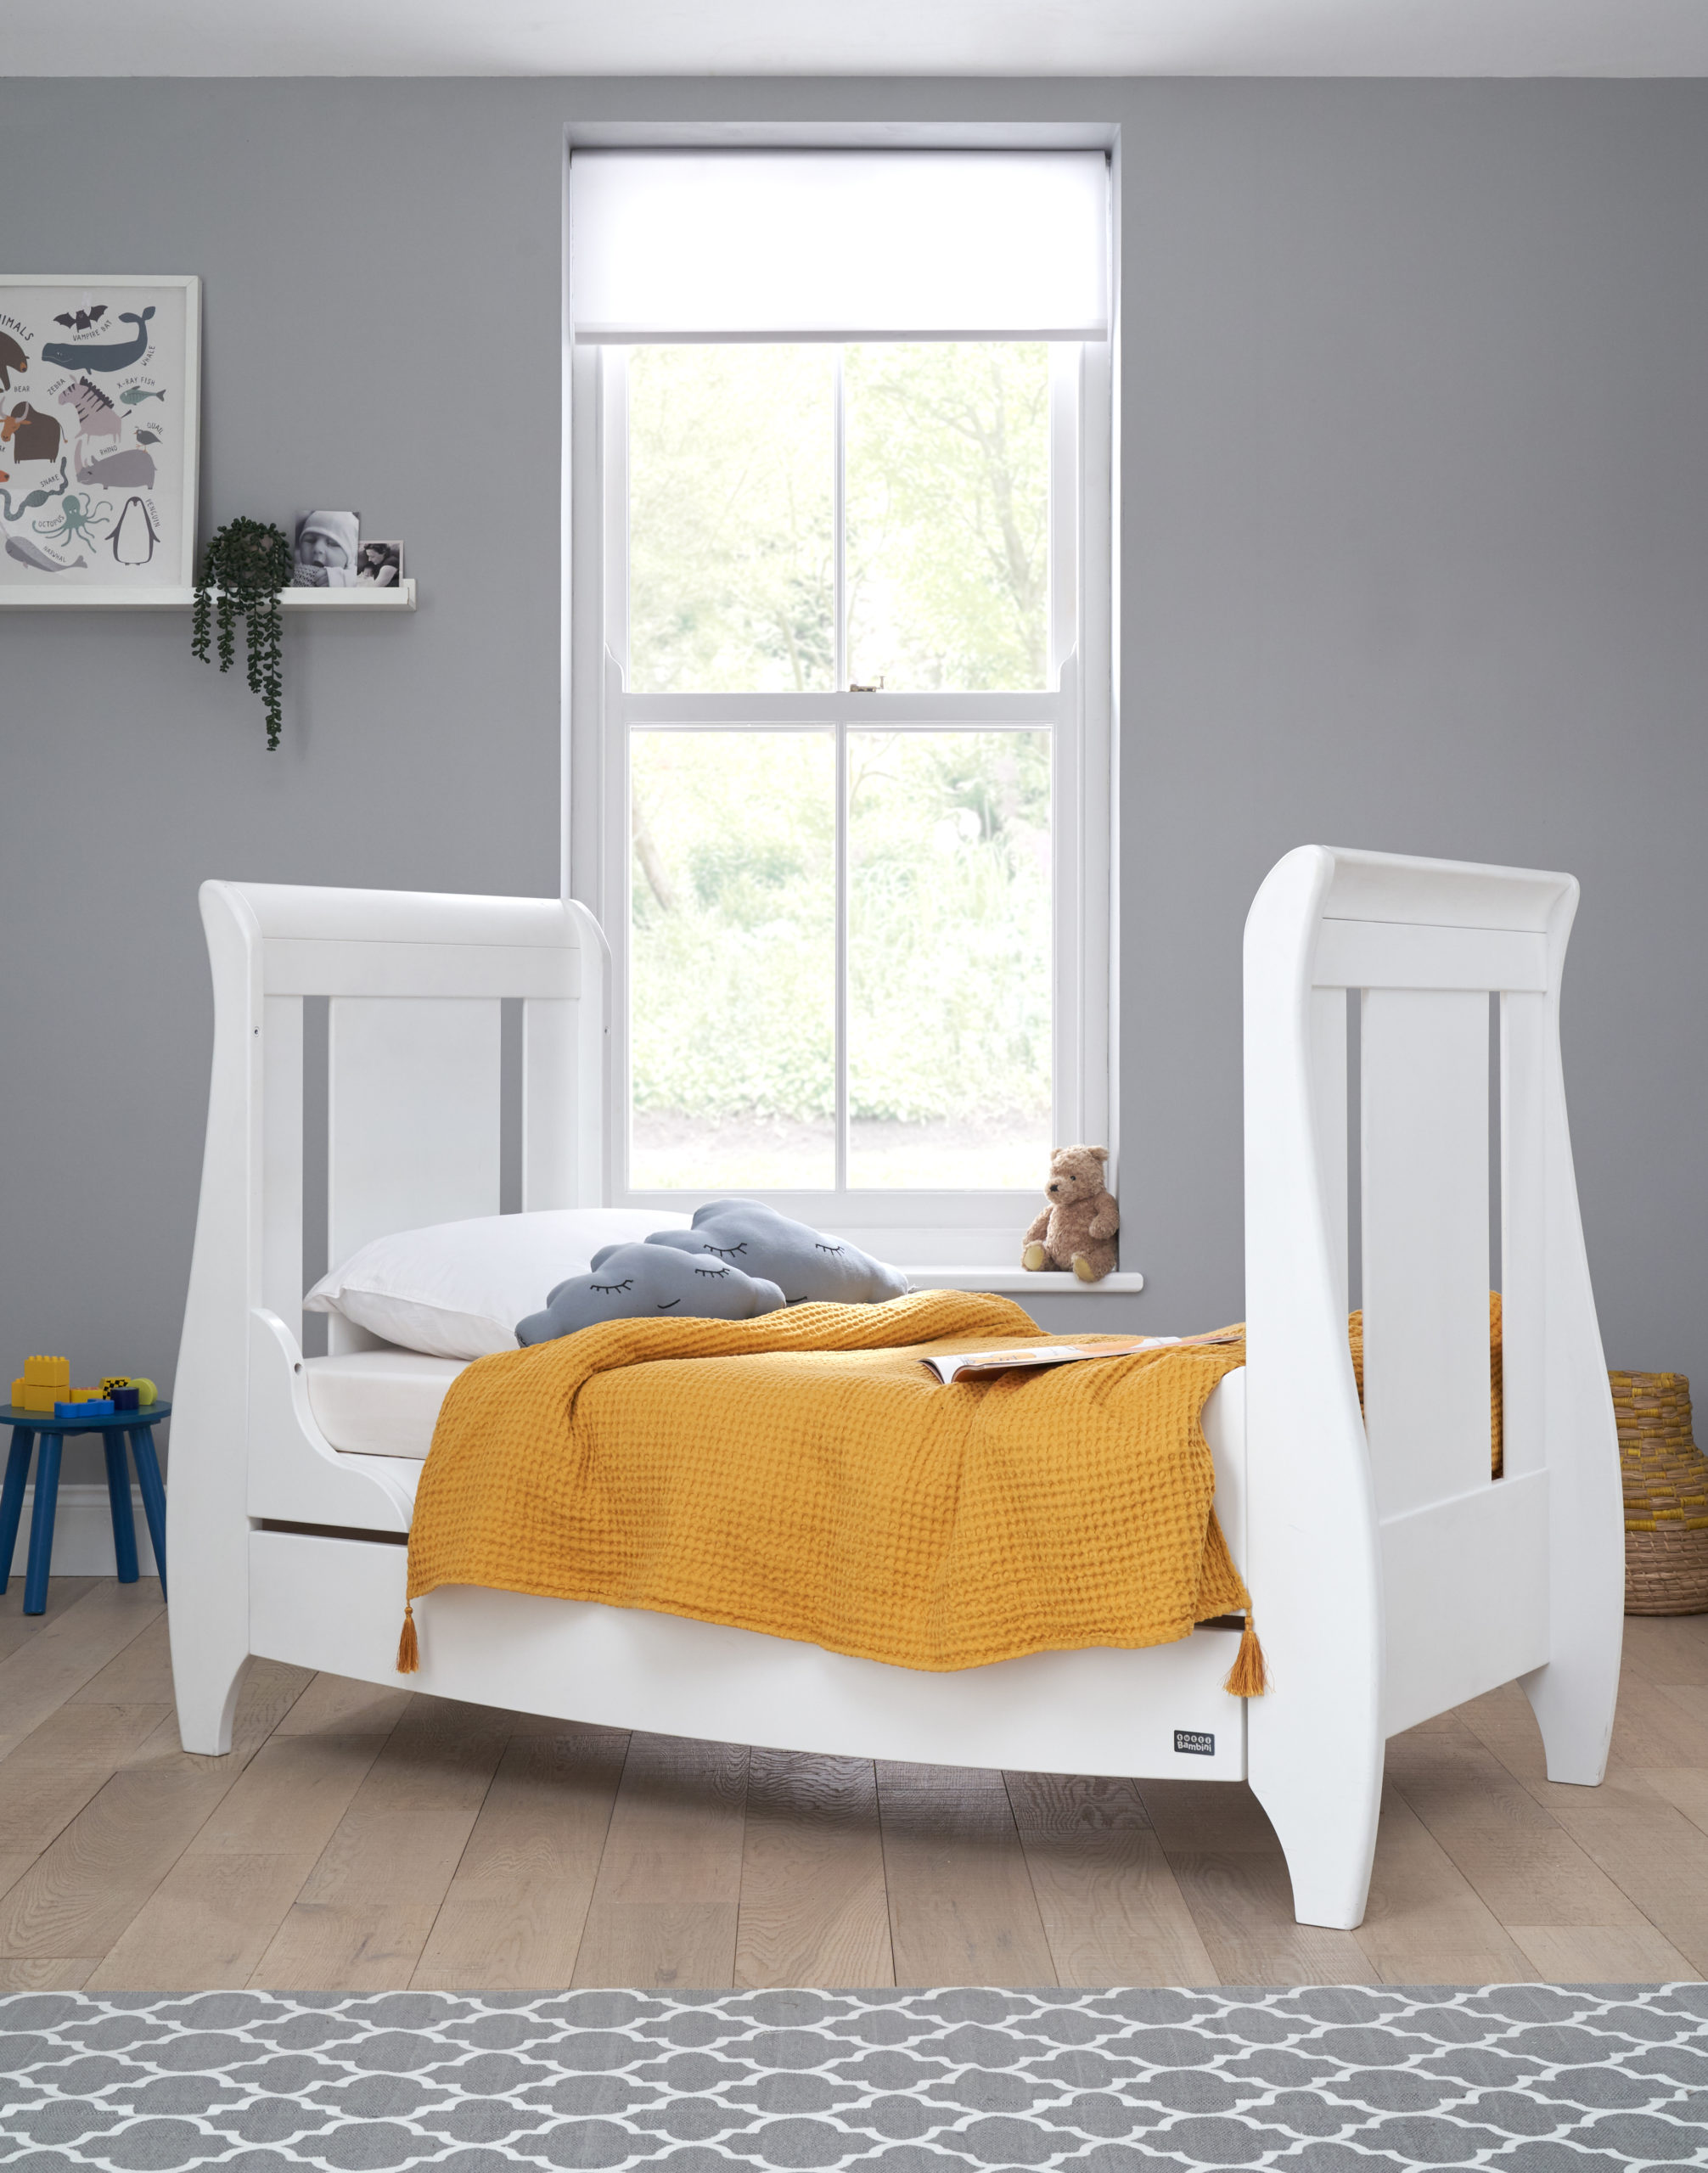 Lucas White 3 in 1 Cot Bed Kids Beds UK